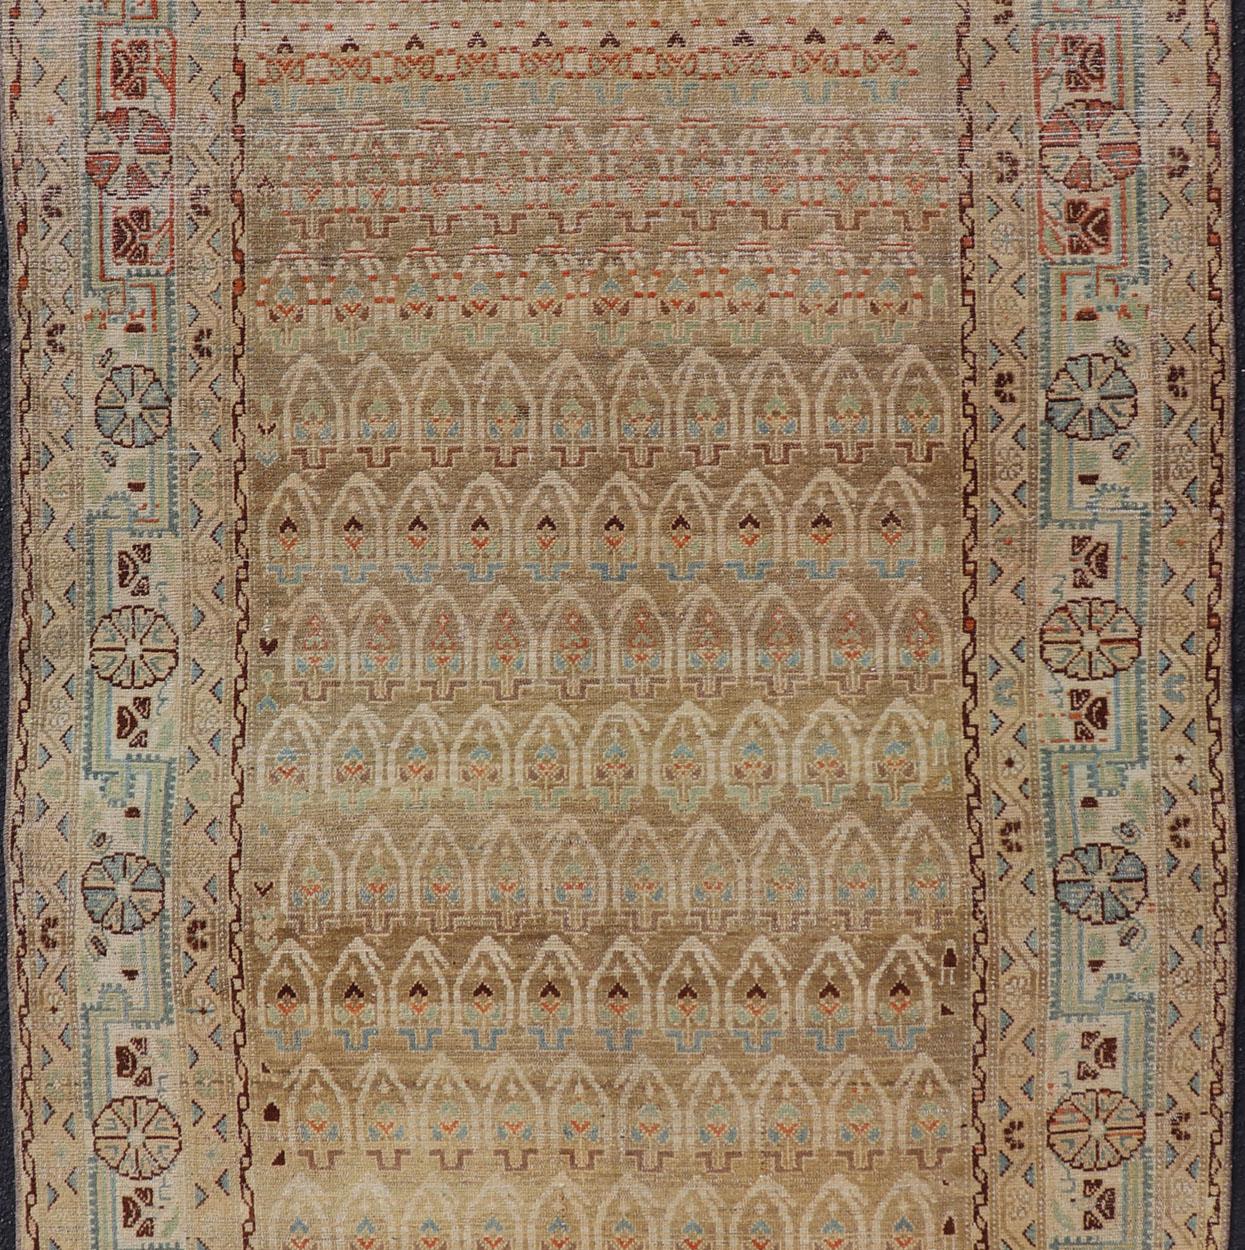 Measures: 4'6 x 9'2 
Antique Hamadan Gallery Rug in Wool with All-Over Sub-Geometric Paisley Design. Keivan Woven Arts; rug EN-15182, country of origin / type: Iran / Hamadan, circa 1920.

This antique Persian Hamadan rug has been hand-knotted in